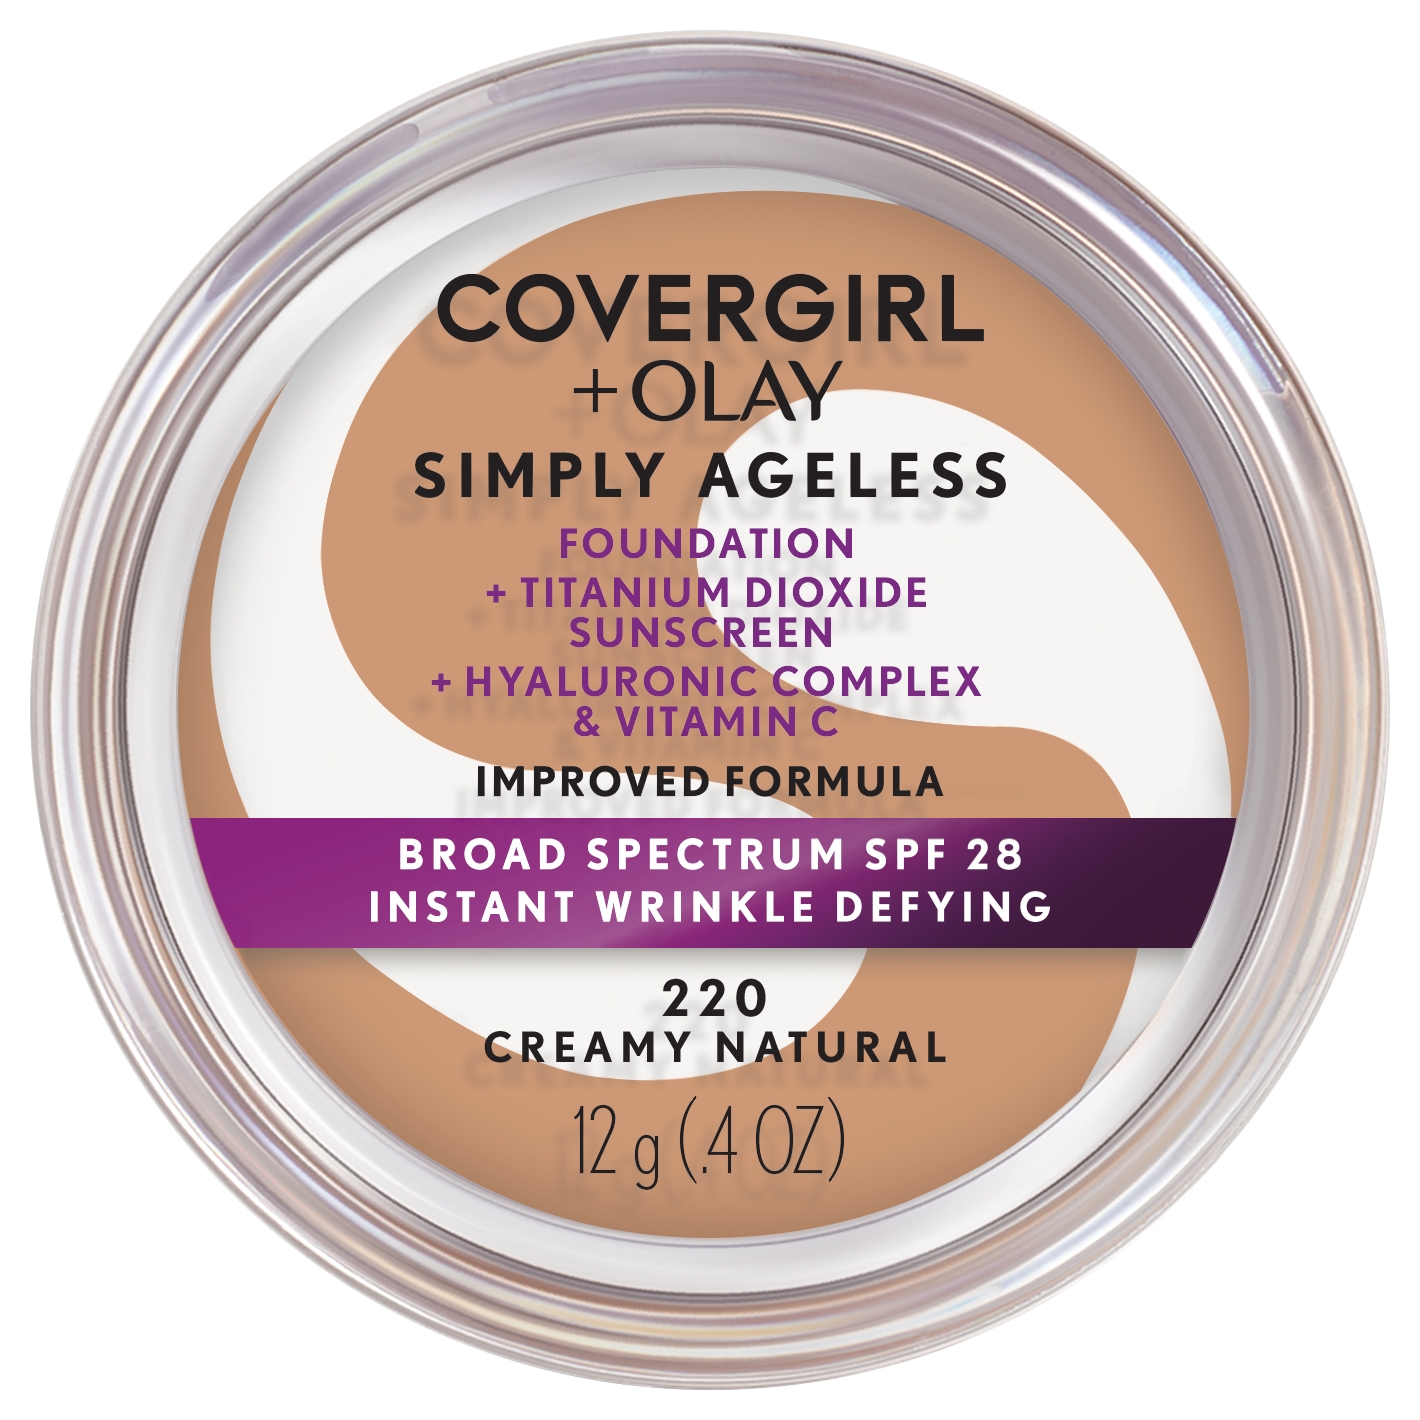 COVERGIRL + OLAY Simply Ageless Instant Wrinkle-Defying Foundation with SPF 28, Creamy Natural, 0.44 oz - image 1 of 9